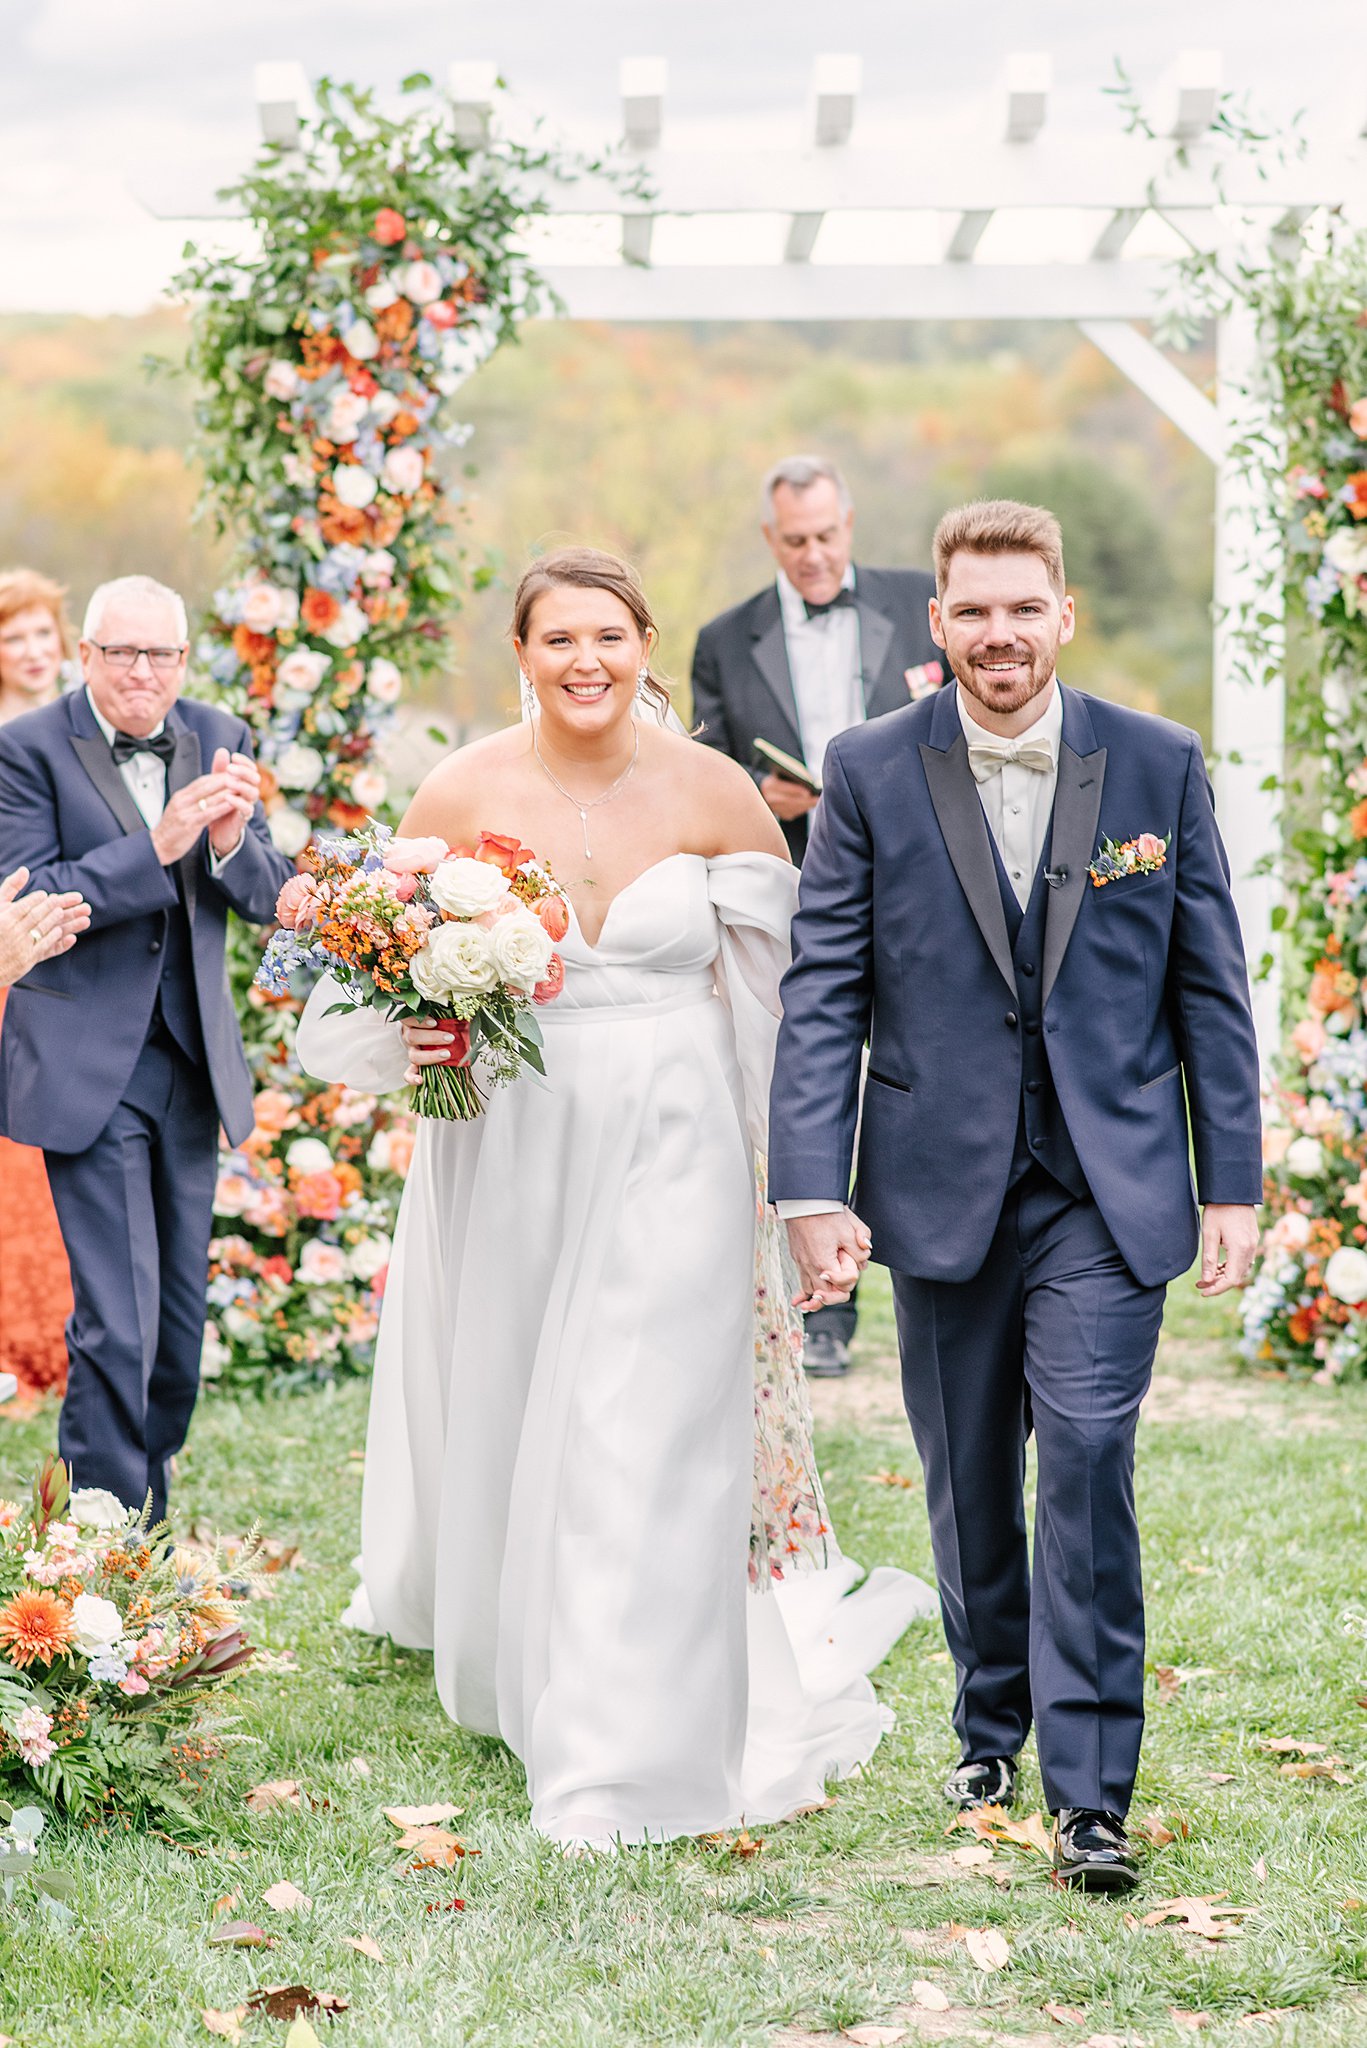 A bride and groom walk back up the aisle holding hands to end their outdoor ceremony